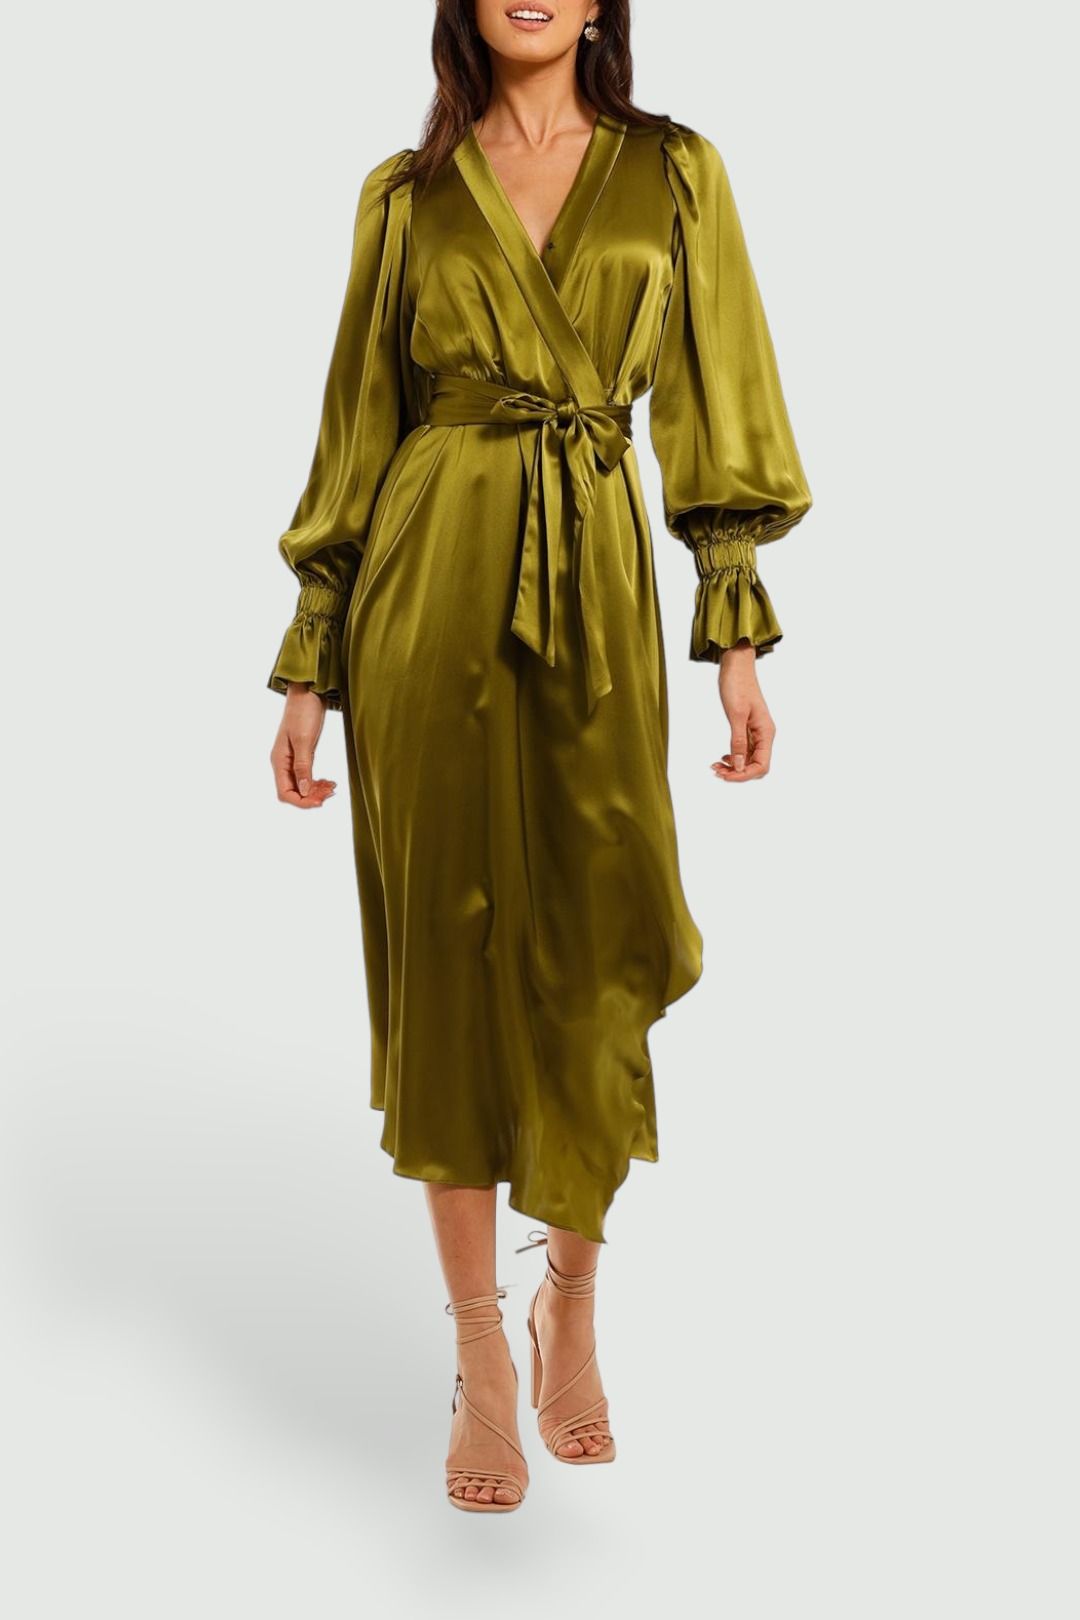 Ginger and Smart Molten Wrap Dress Chartreuse Midi Length